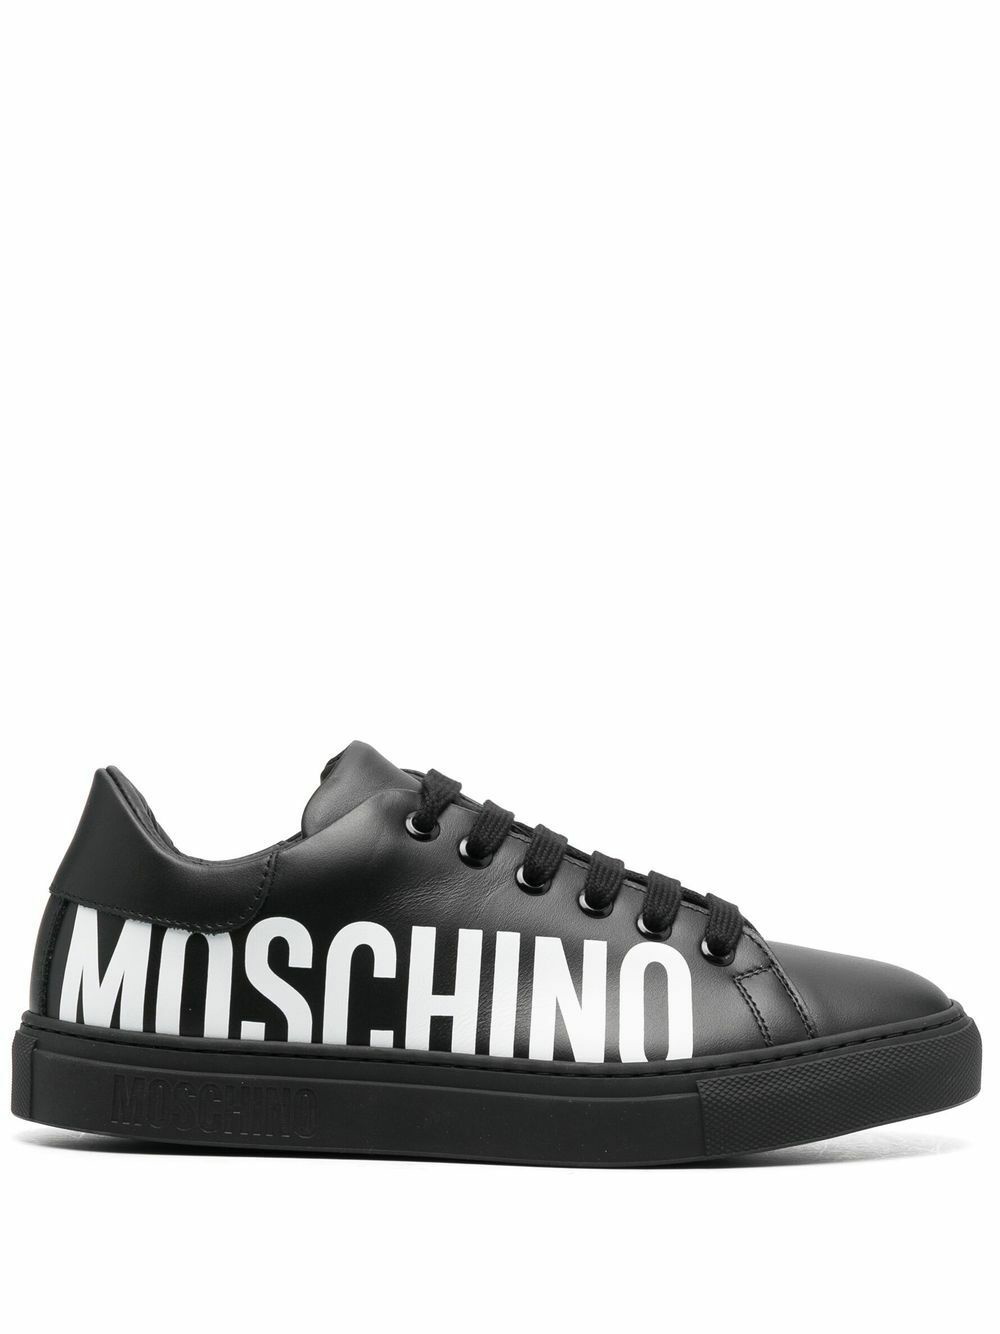 MOSCHINO - Leather Sneakers Moschino